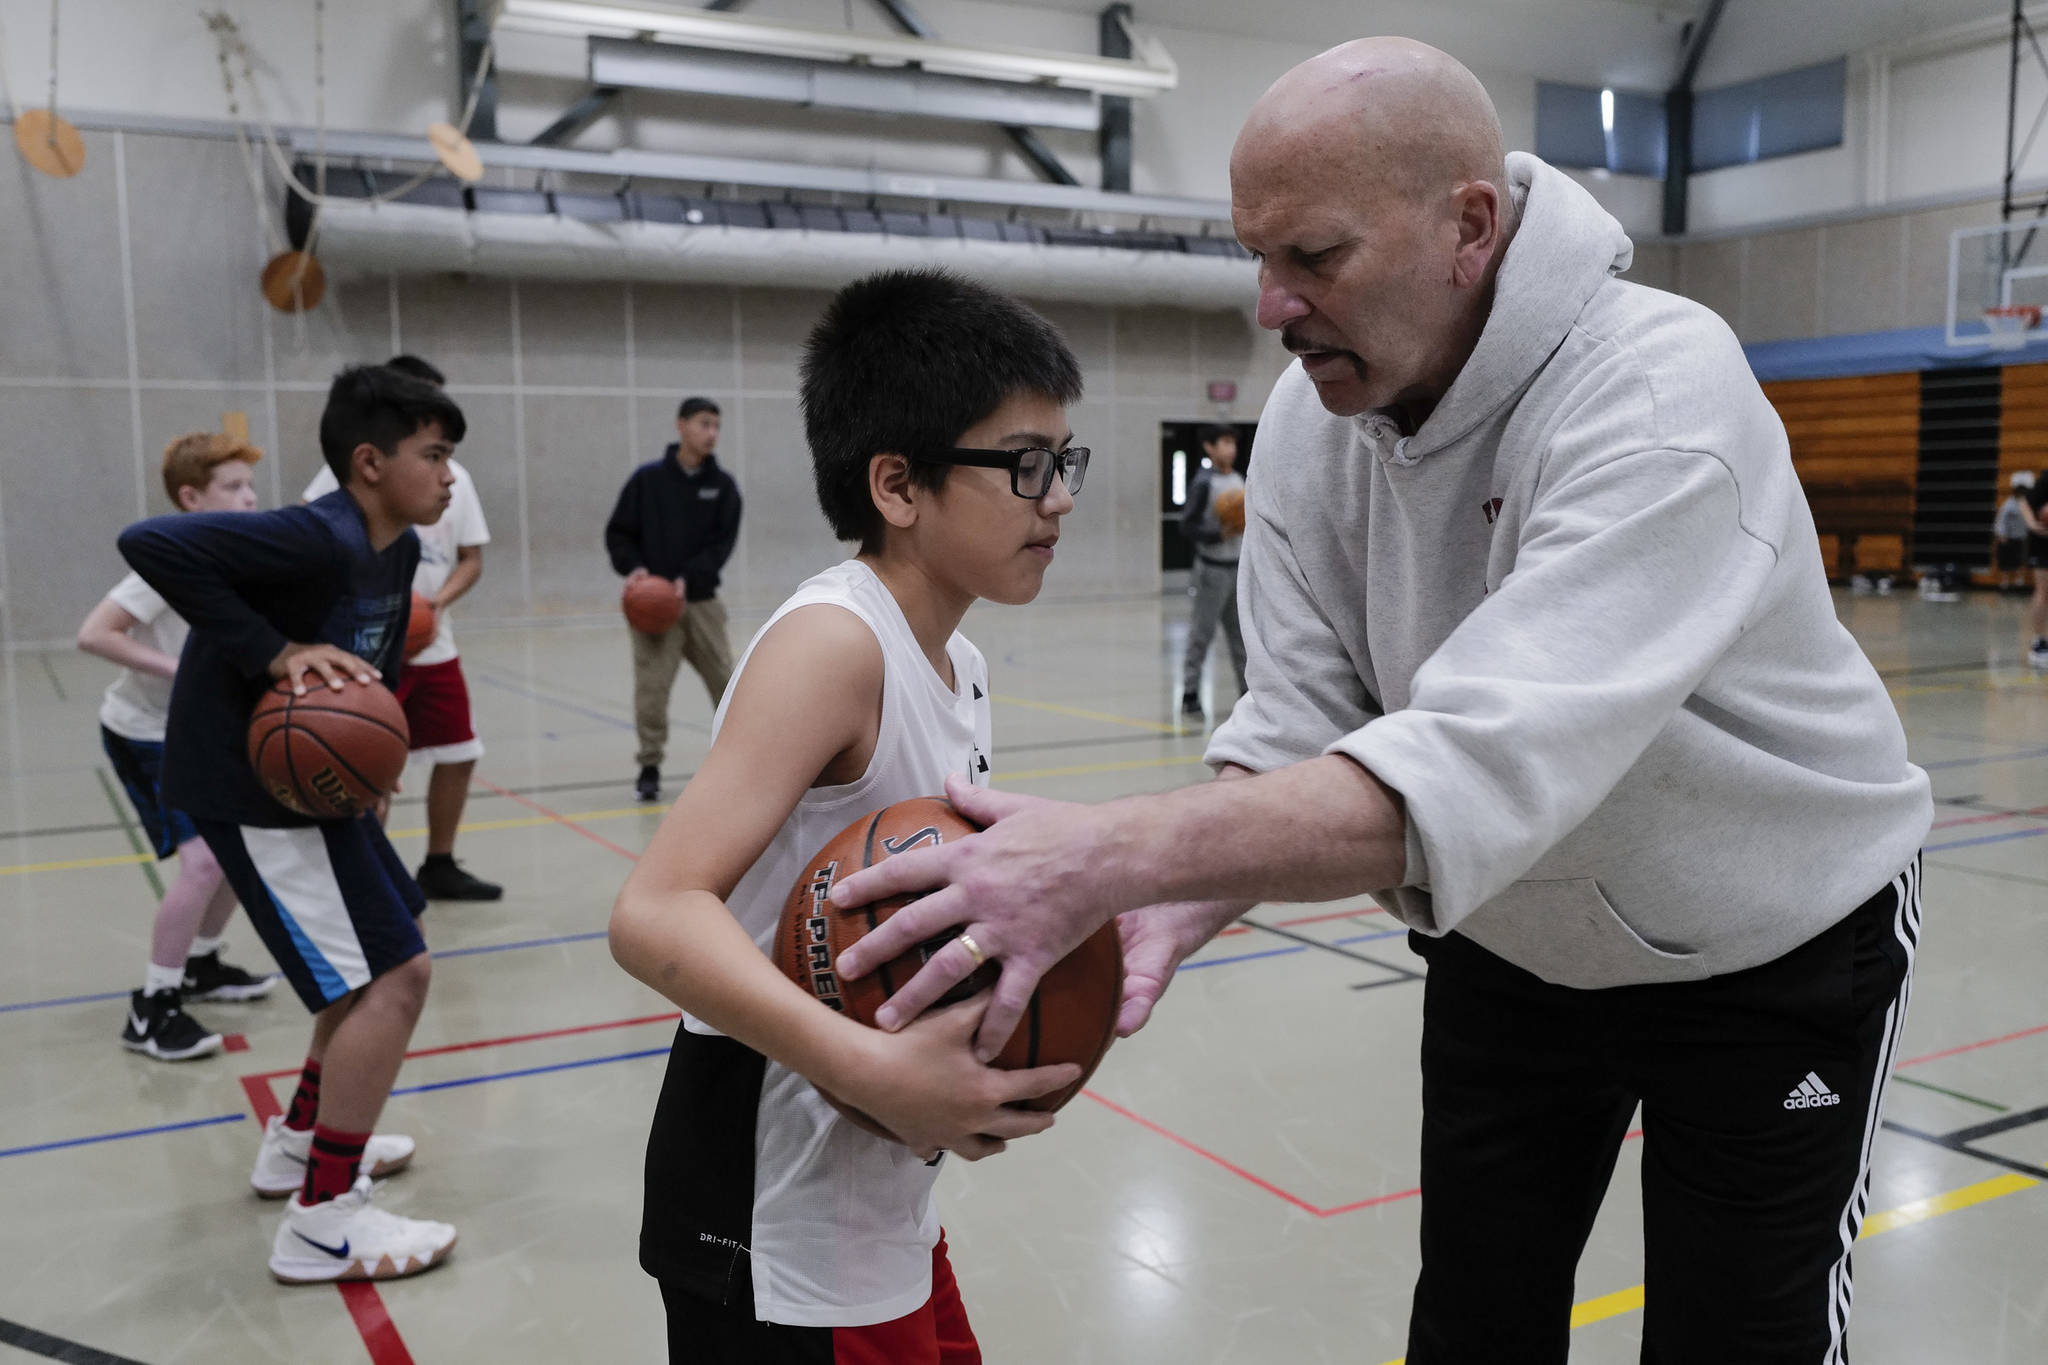 Coach Bob Saviers helps David Friday, 11, with his three-point stance during the Latseen Hoop Camp at Dzantak’i Heeni Middle School on Monday, July 29, 2019. The camp runs all week for students entering grades 6-12. (Michael Penn | Juneau Empire)